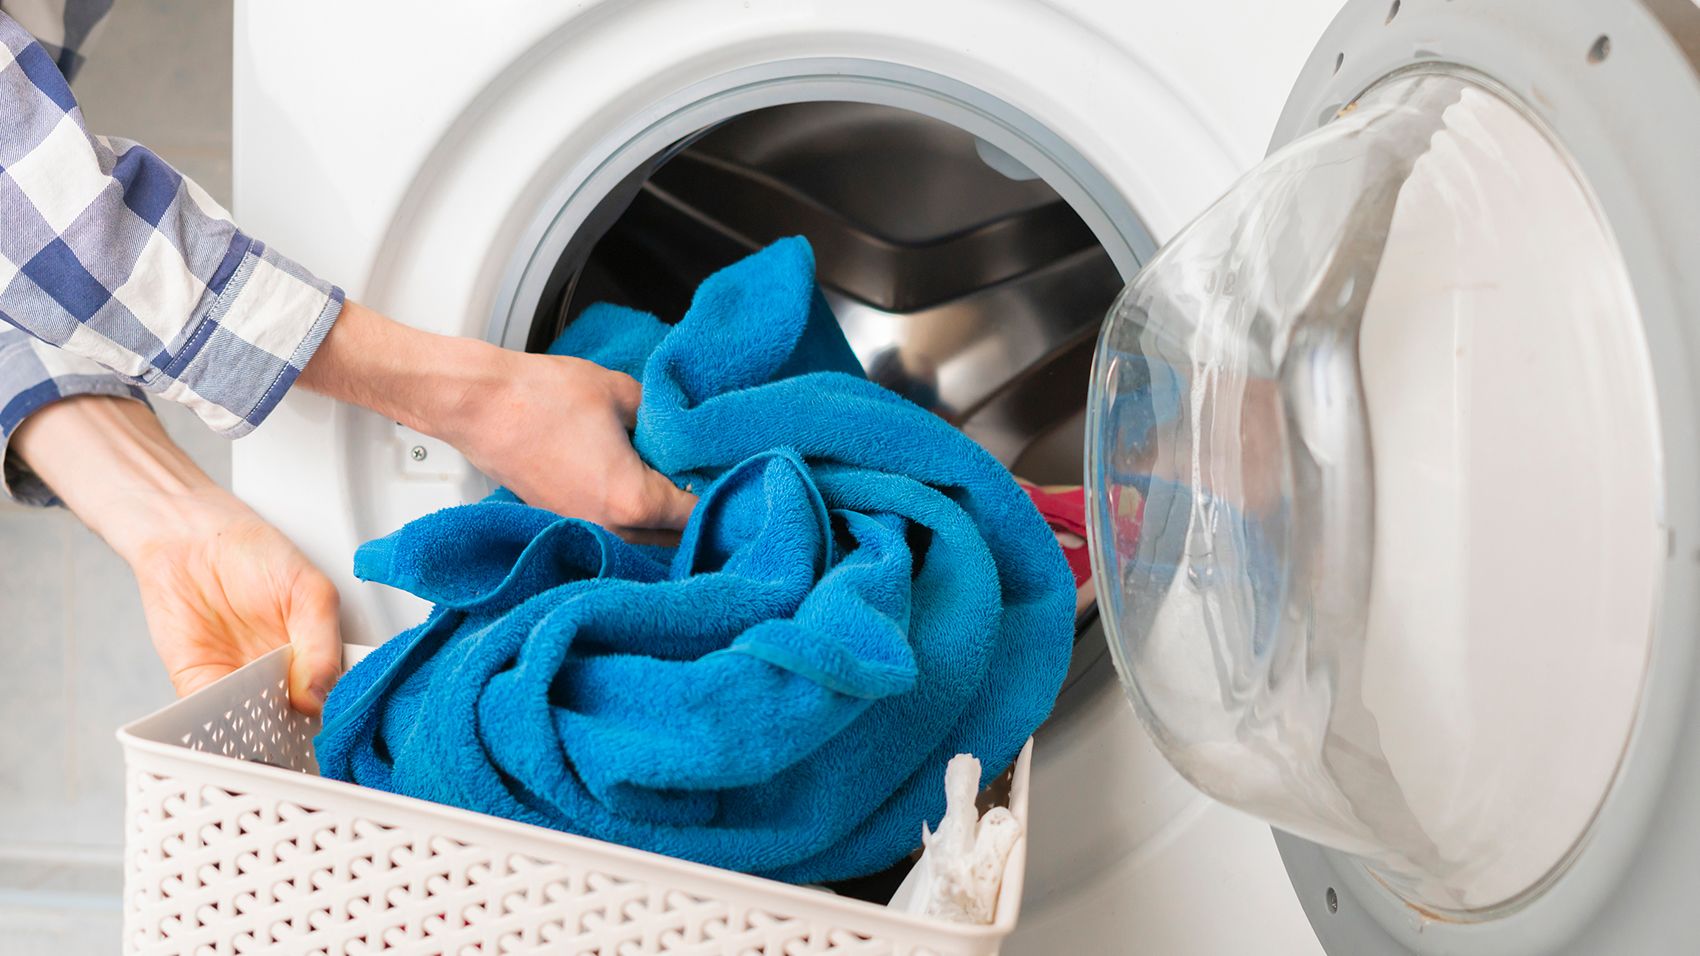 How to wash towels with care to keep them looking new | CNN Underscored